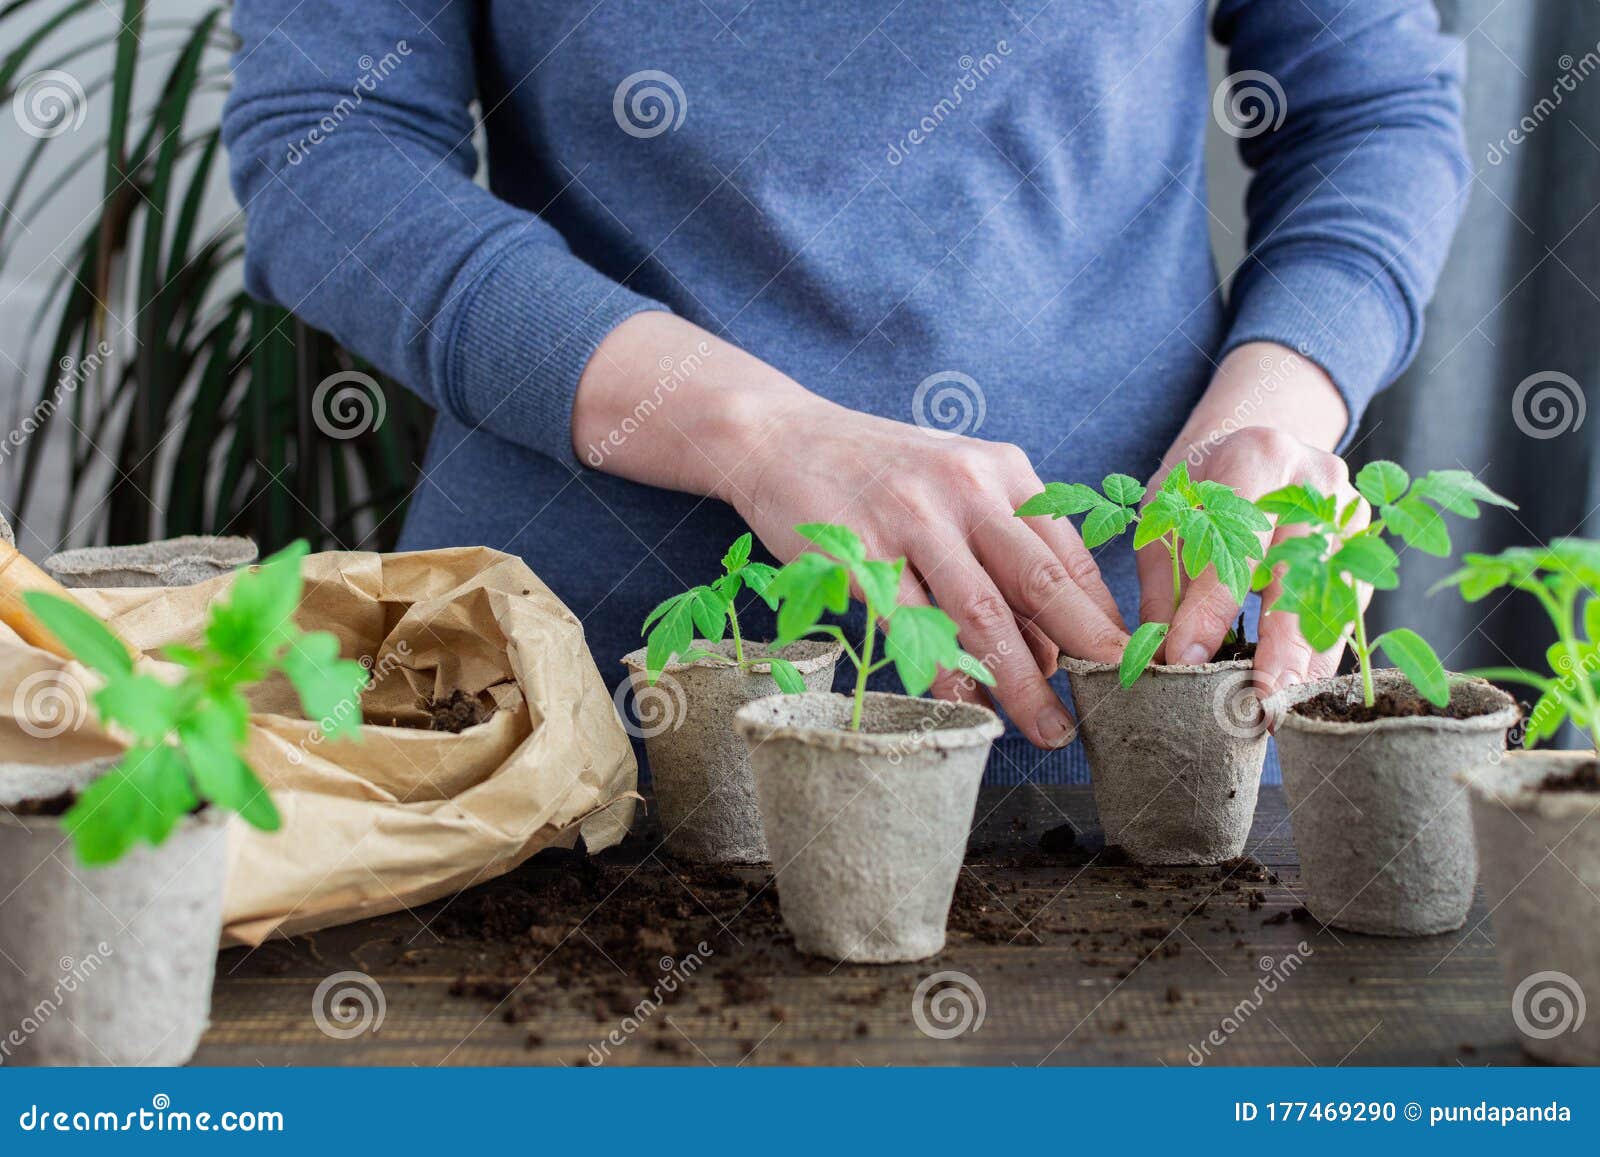 Transplanting Seedlings Pricking Out Stock Photo Image Of Growing Botany 177469290,Types Of Fabric Materials For Dresses